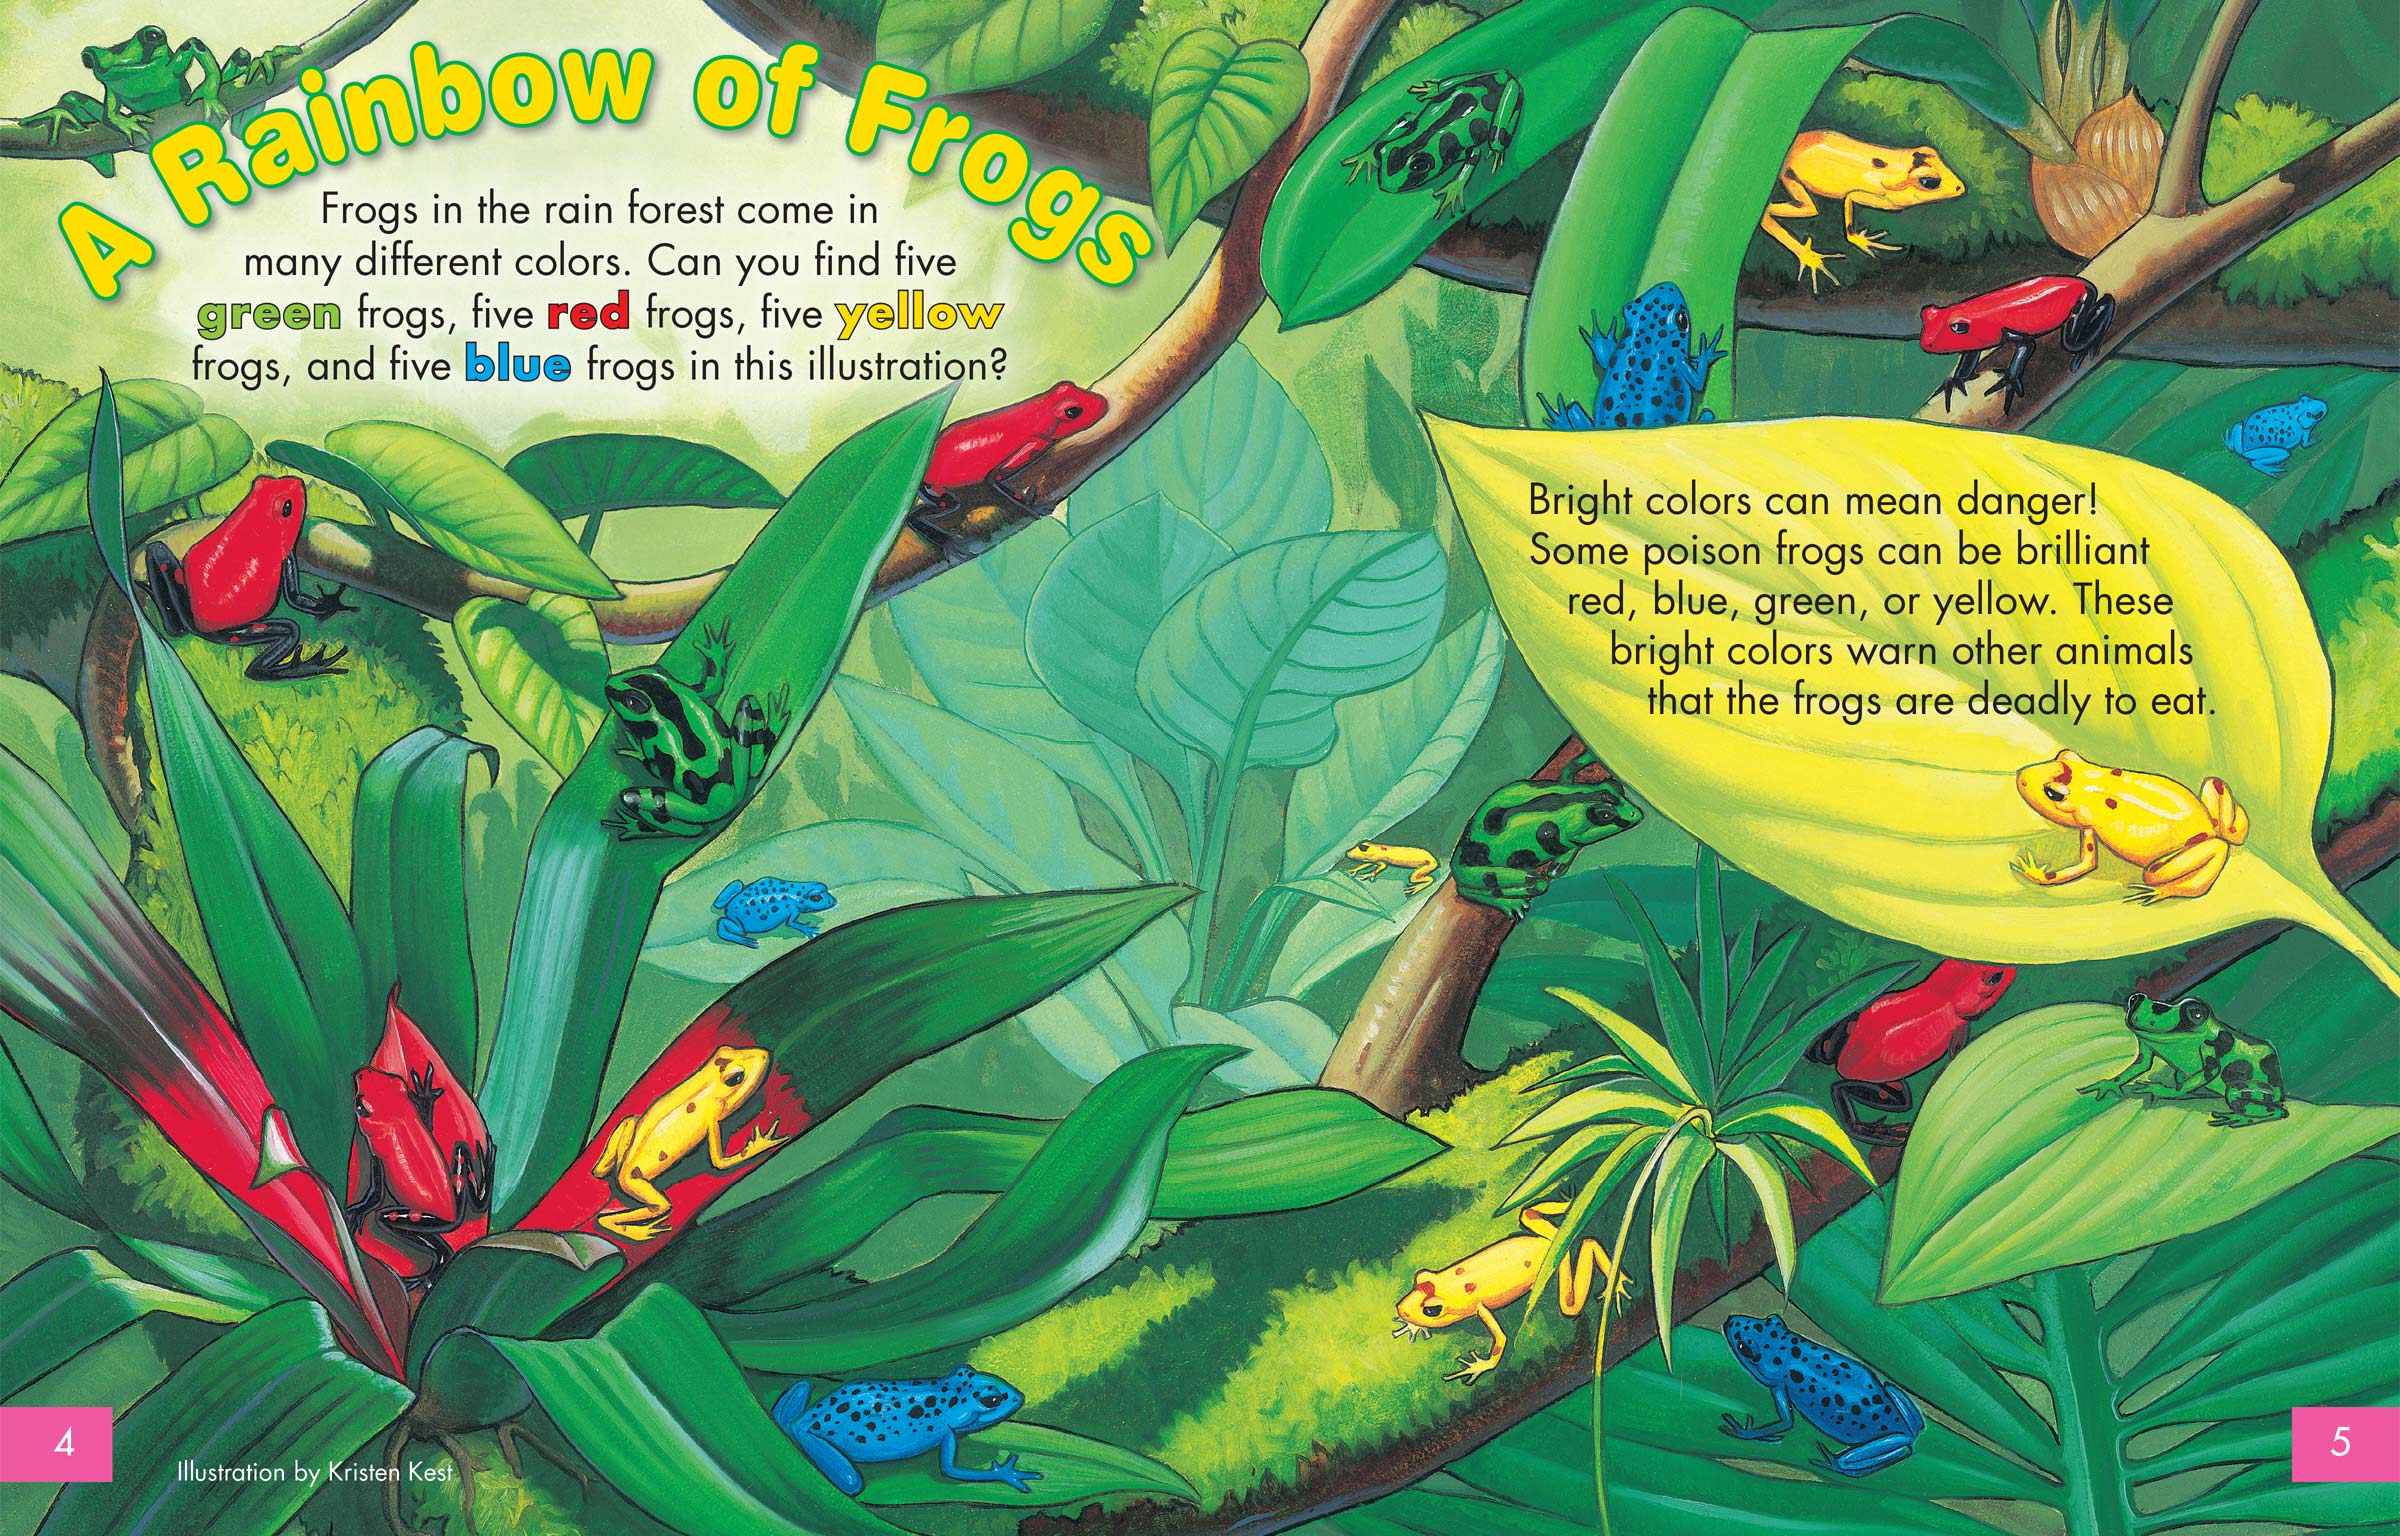 Pages 4&5 of Zootles Frogs, showing various colored frogs in a jungle setting.